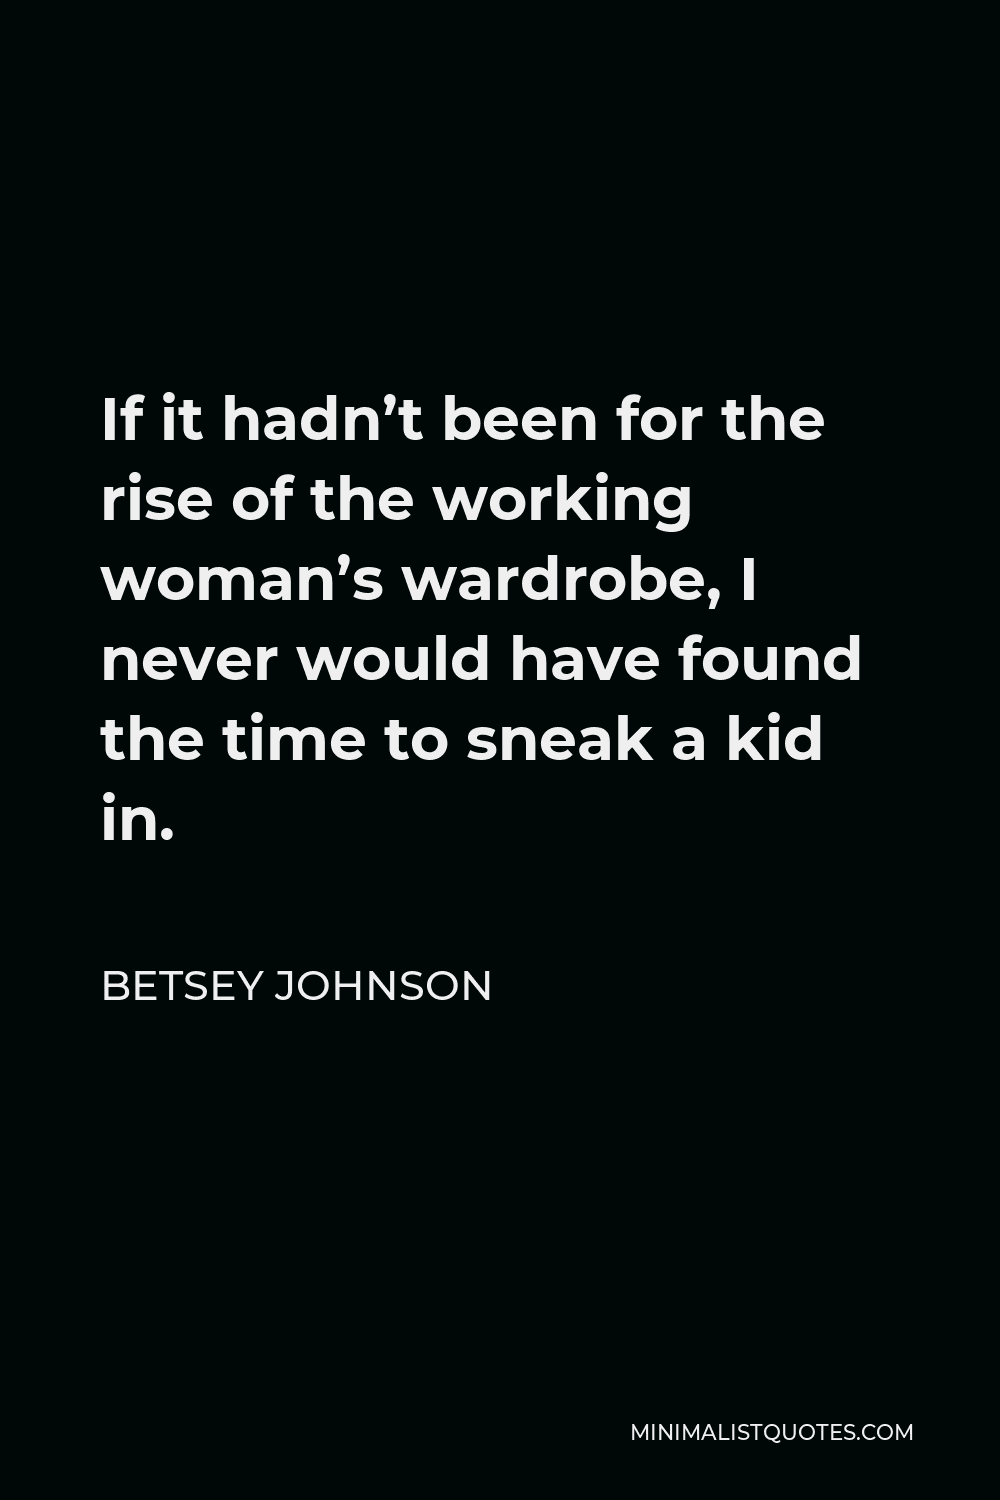 Betsey Johnson Quote - If it hadn’t been for the rise of the working woman’s wardrobe, I never would have found the time to sneak a kid in.